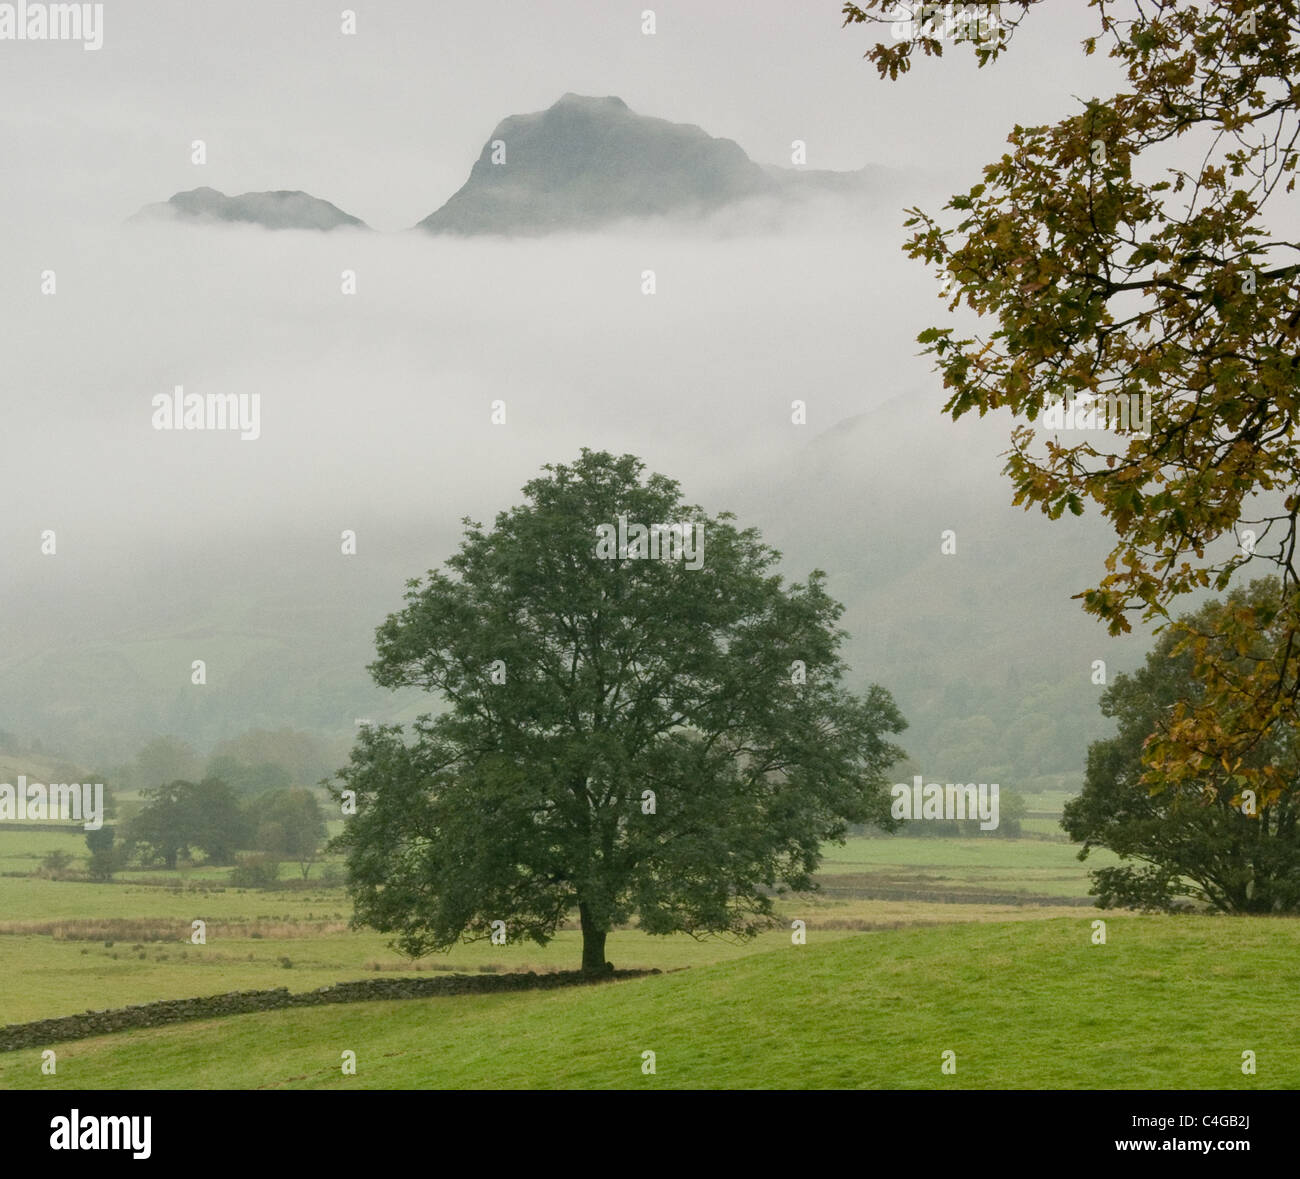 Langdale Pikes towering over a tree and shrouded in mist Stock Photo